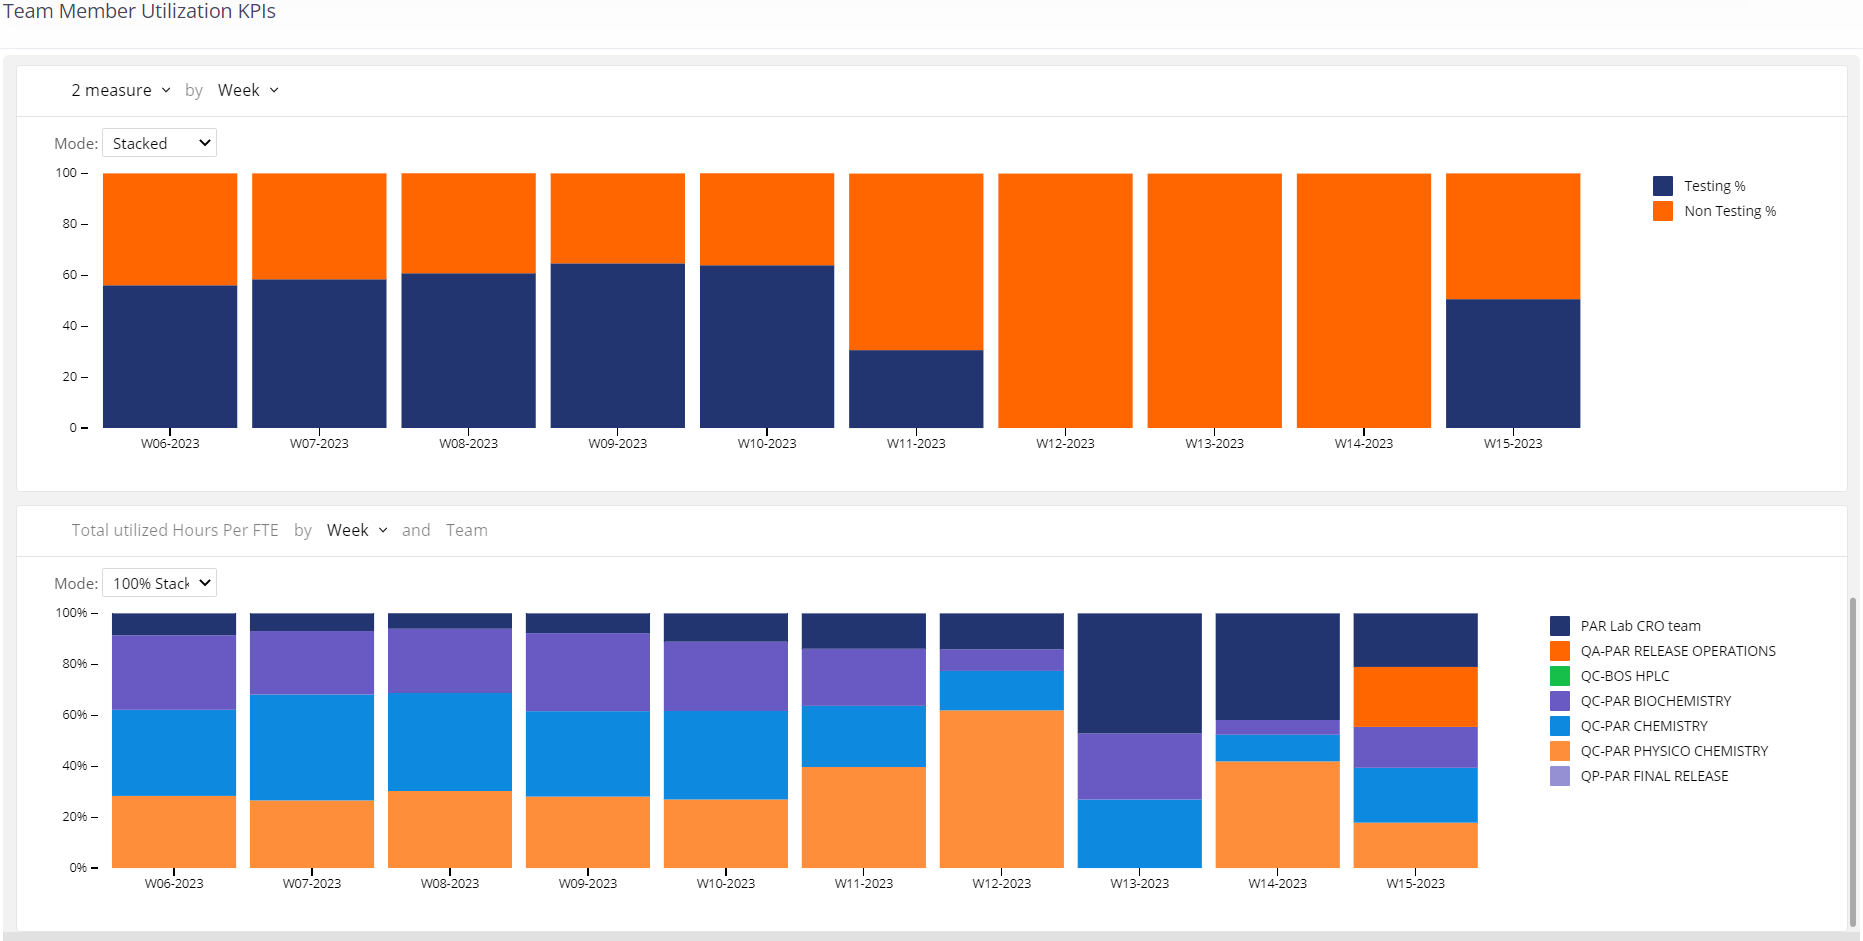 An example of an asset utilization KPI dashboard for a pharmaceutical QC department, showing weekly stats for the proportion of work dedicated to testing vs non-testing activities and the proportion of total work executed by different labs